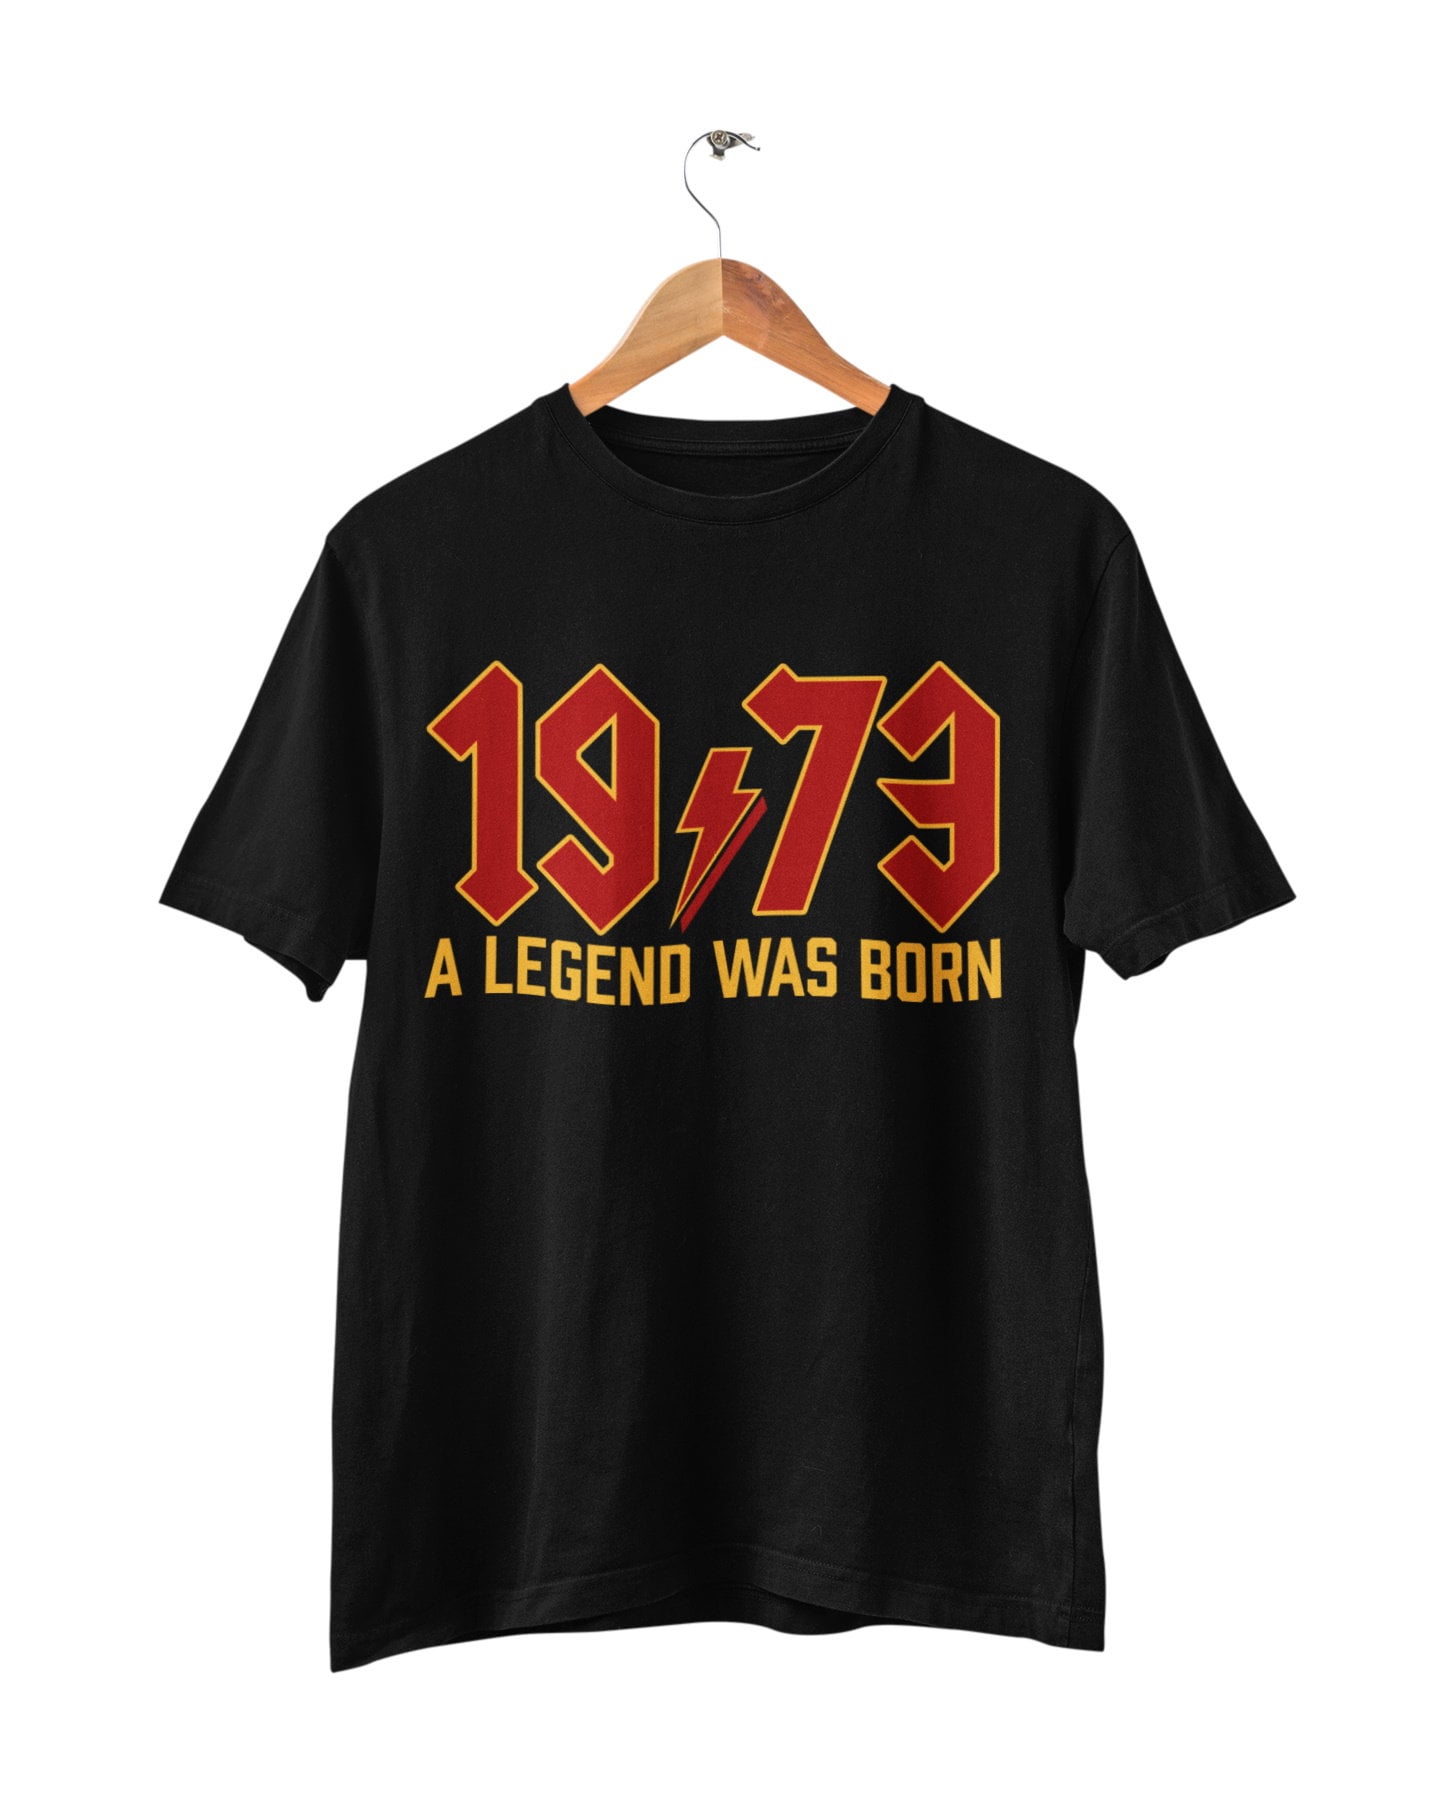 Discover Funny 50th Birthday T Shirt 2023 Shirt 1973 A Legend Was Born heavy metal rock style BY12